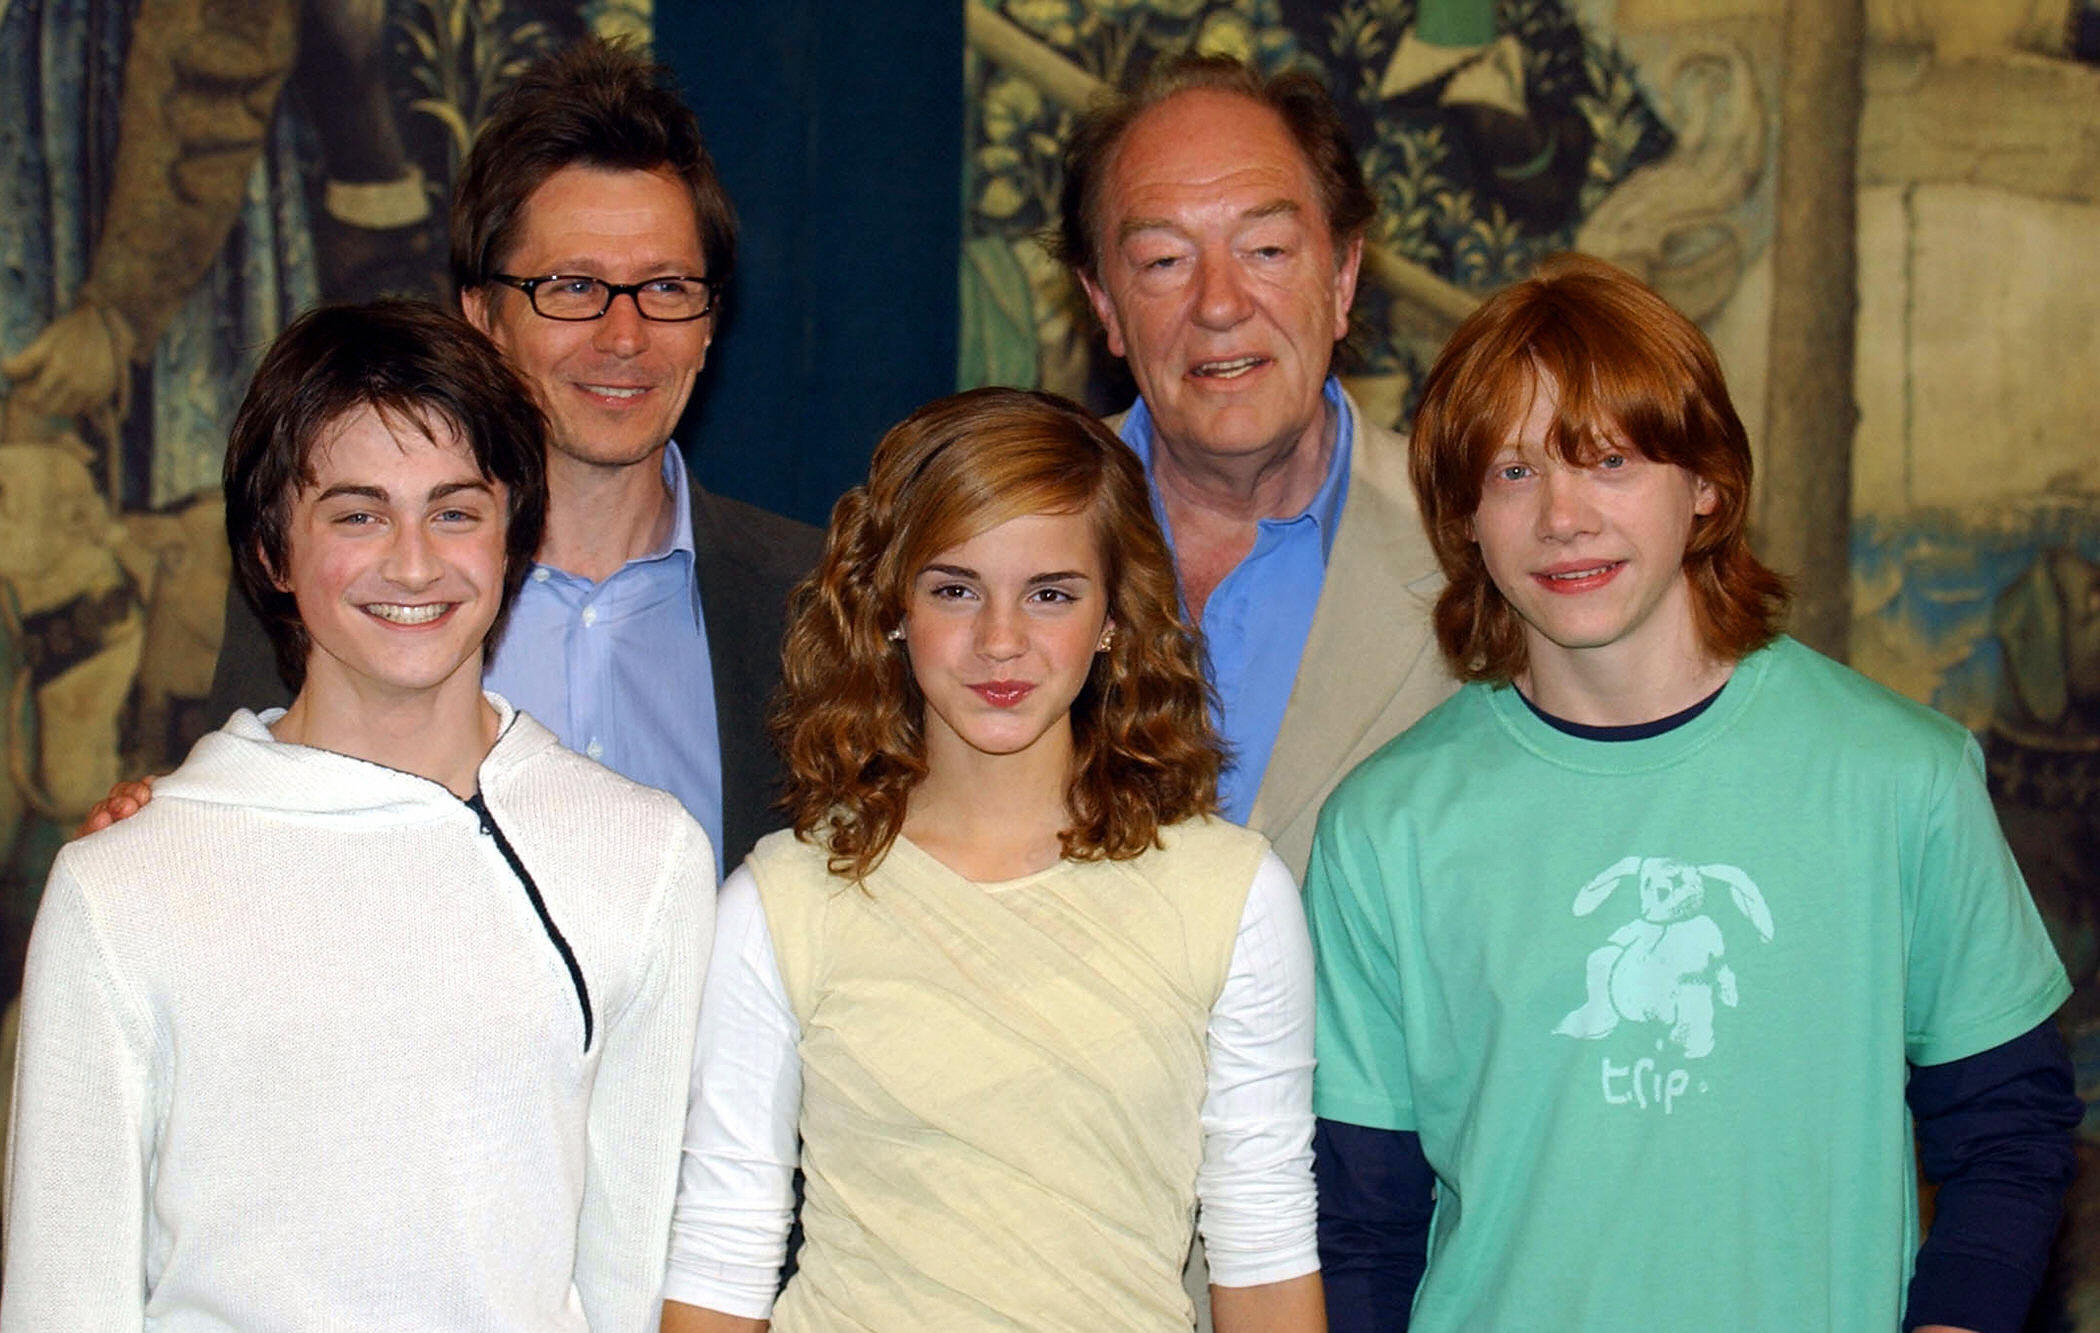 Daniel Radcliffe, Gary Oldman, Emma Watson, Sir Michael Gambon, and Rupert Grint at the photo call for "Harry Potter and the Prisoner of Azkaban" in London England on May 27, 2004 | Source: Getty Images